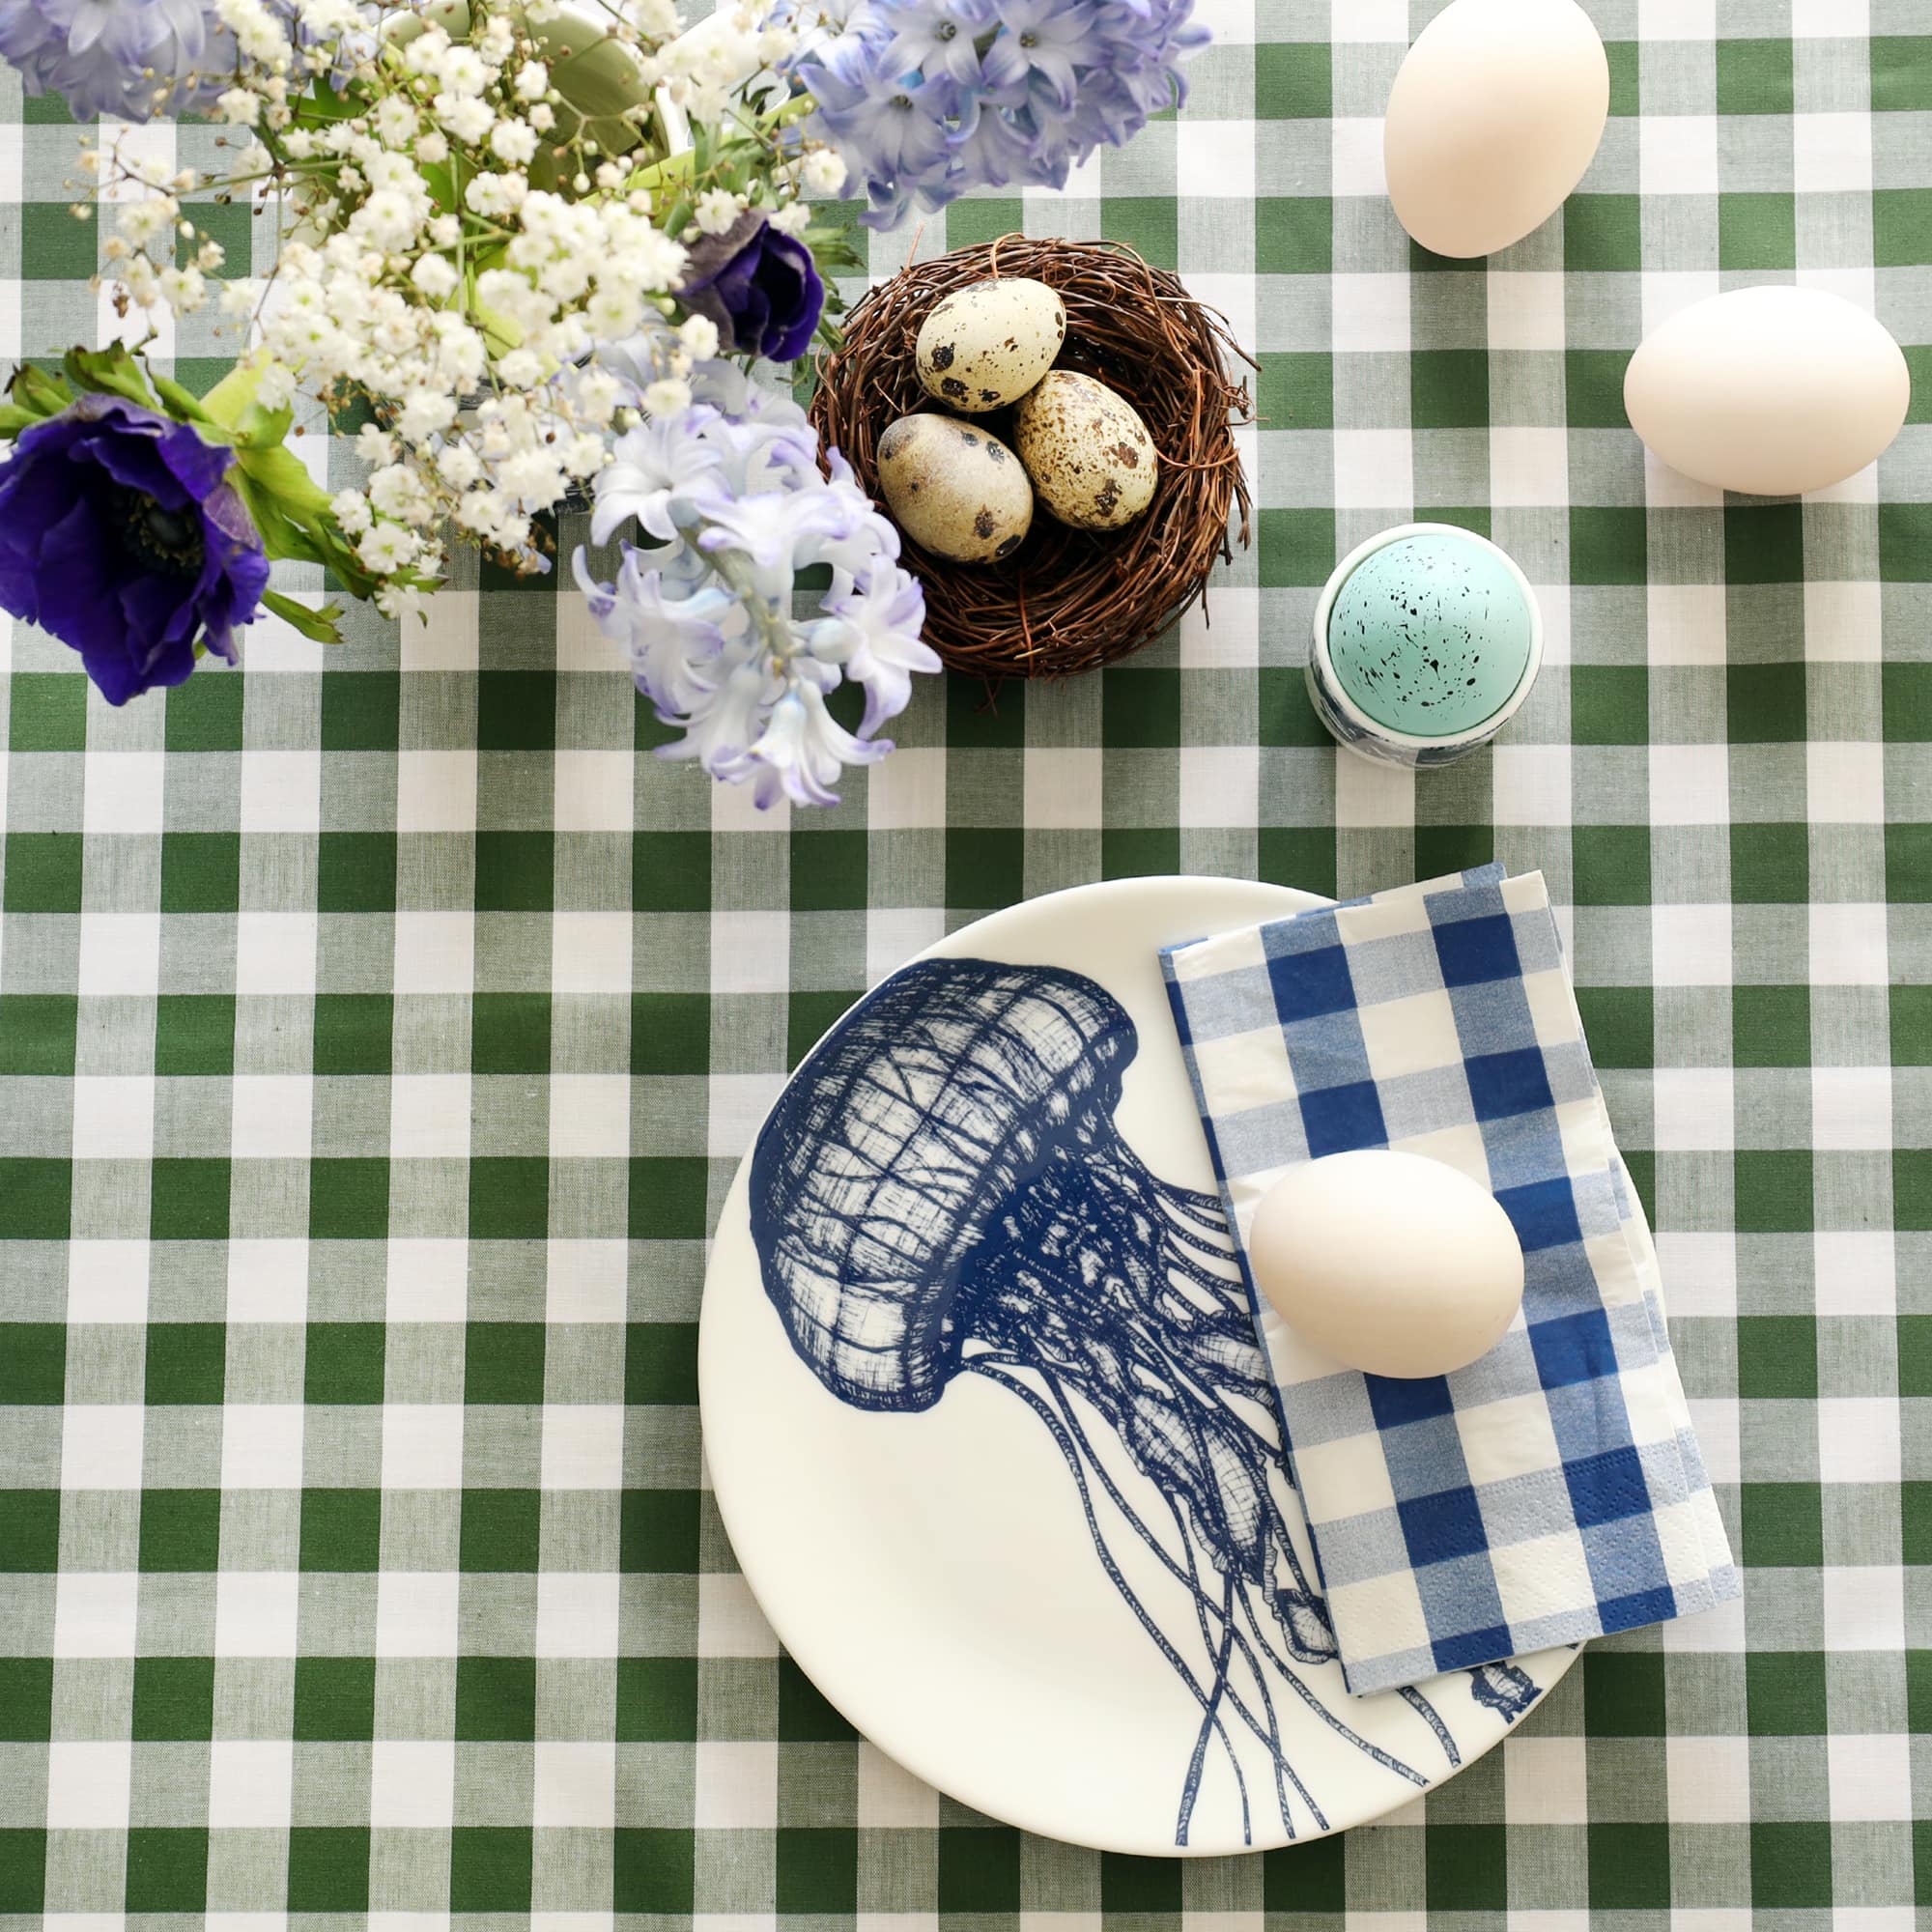 White plate with navy blue jellyfish decoration with folded blue gingham napkin and duck egg on it. This is on a green gingham tablecloth with a small nest and quails eggs, hyacinths and anemones and more eggs.